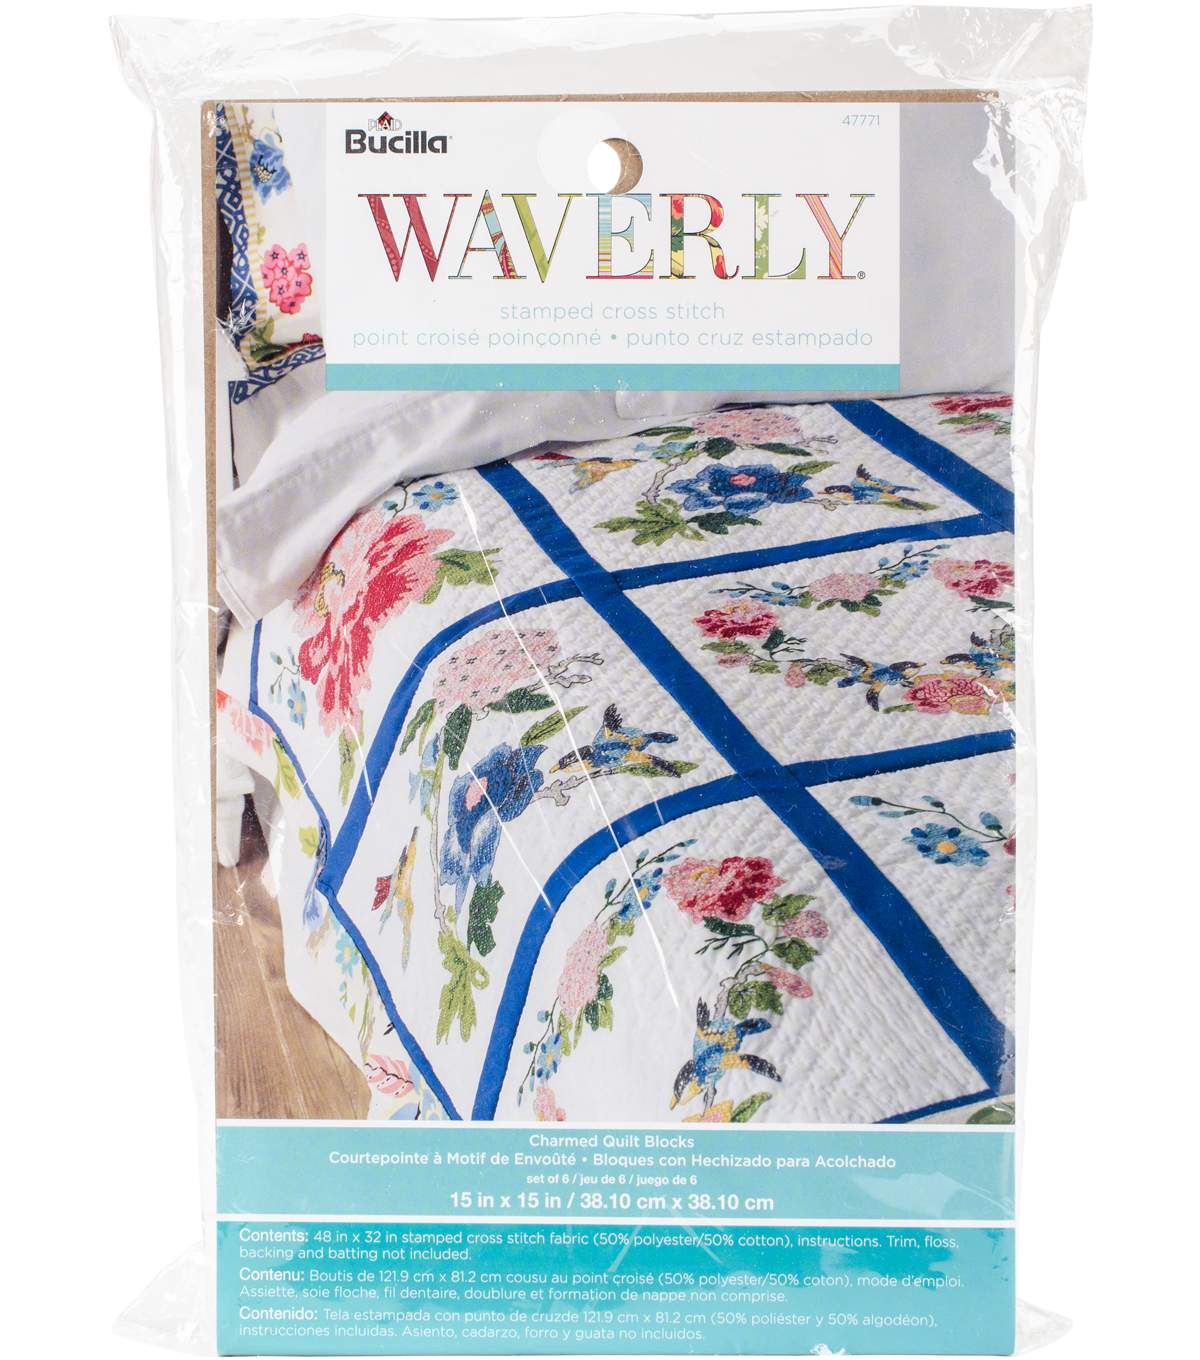 Stamped Embroidery Patterns Stamped Embroidery Quilt Blocks 15x15 6 Pack Waverly Charmed